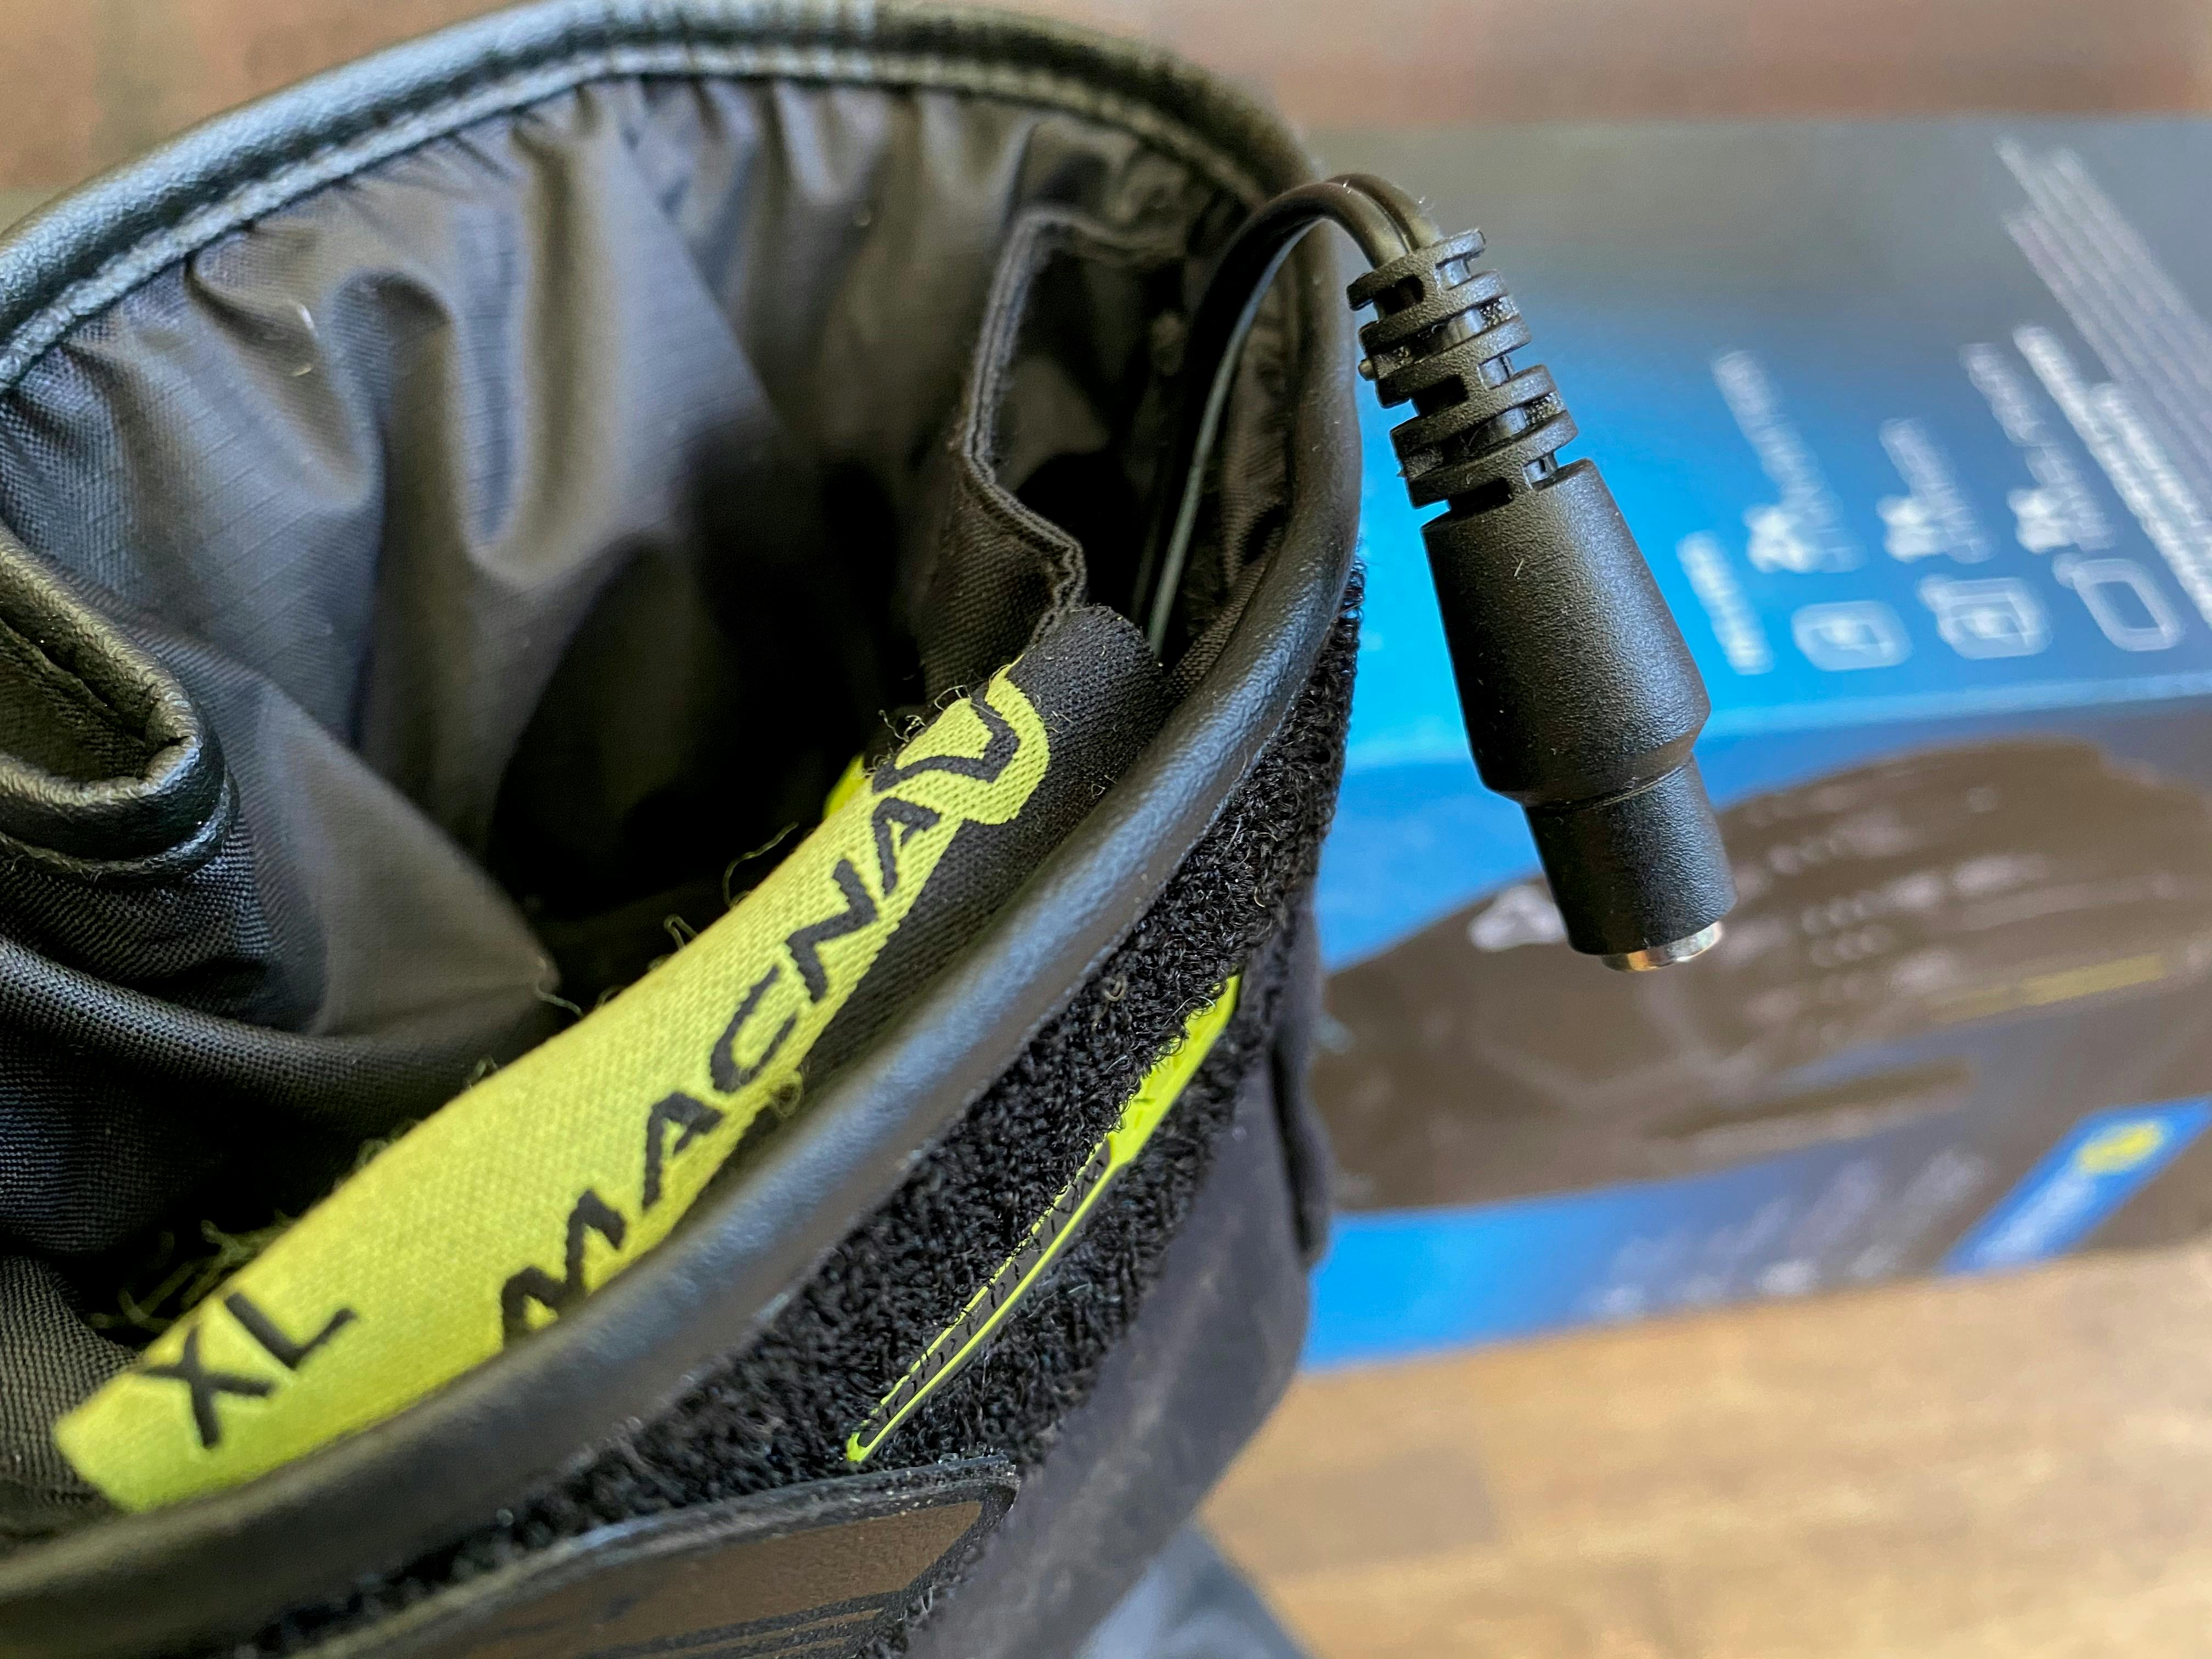 The connection cable hanging out of the glove in the Macna Ion